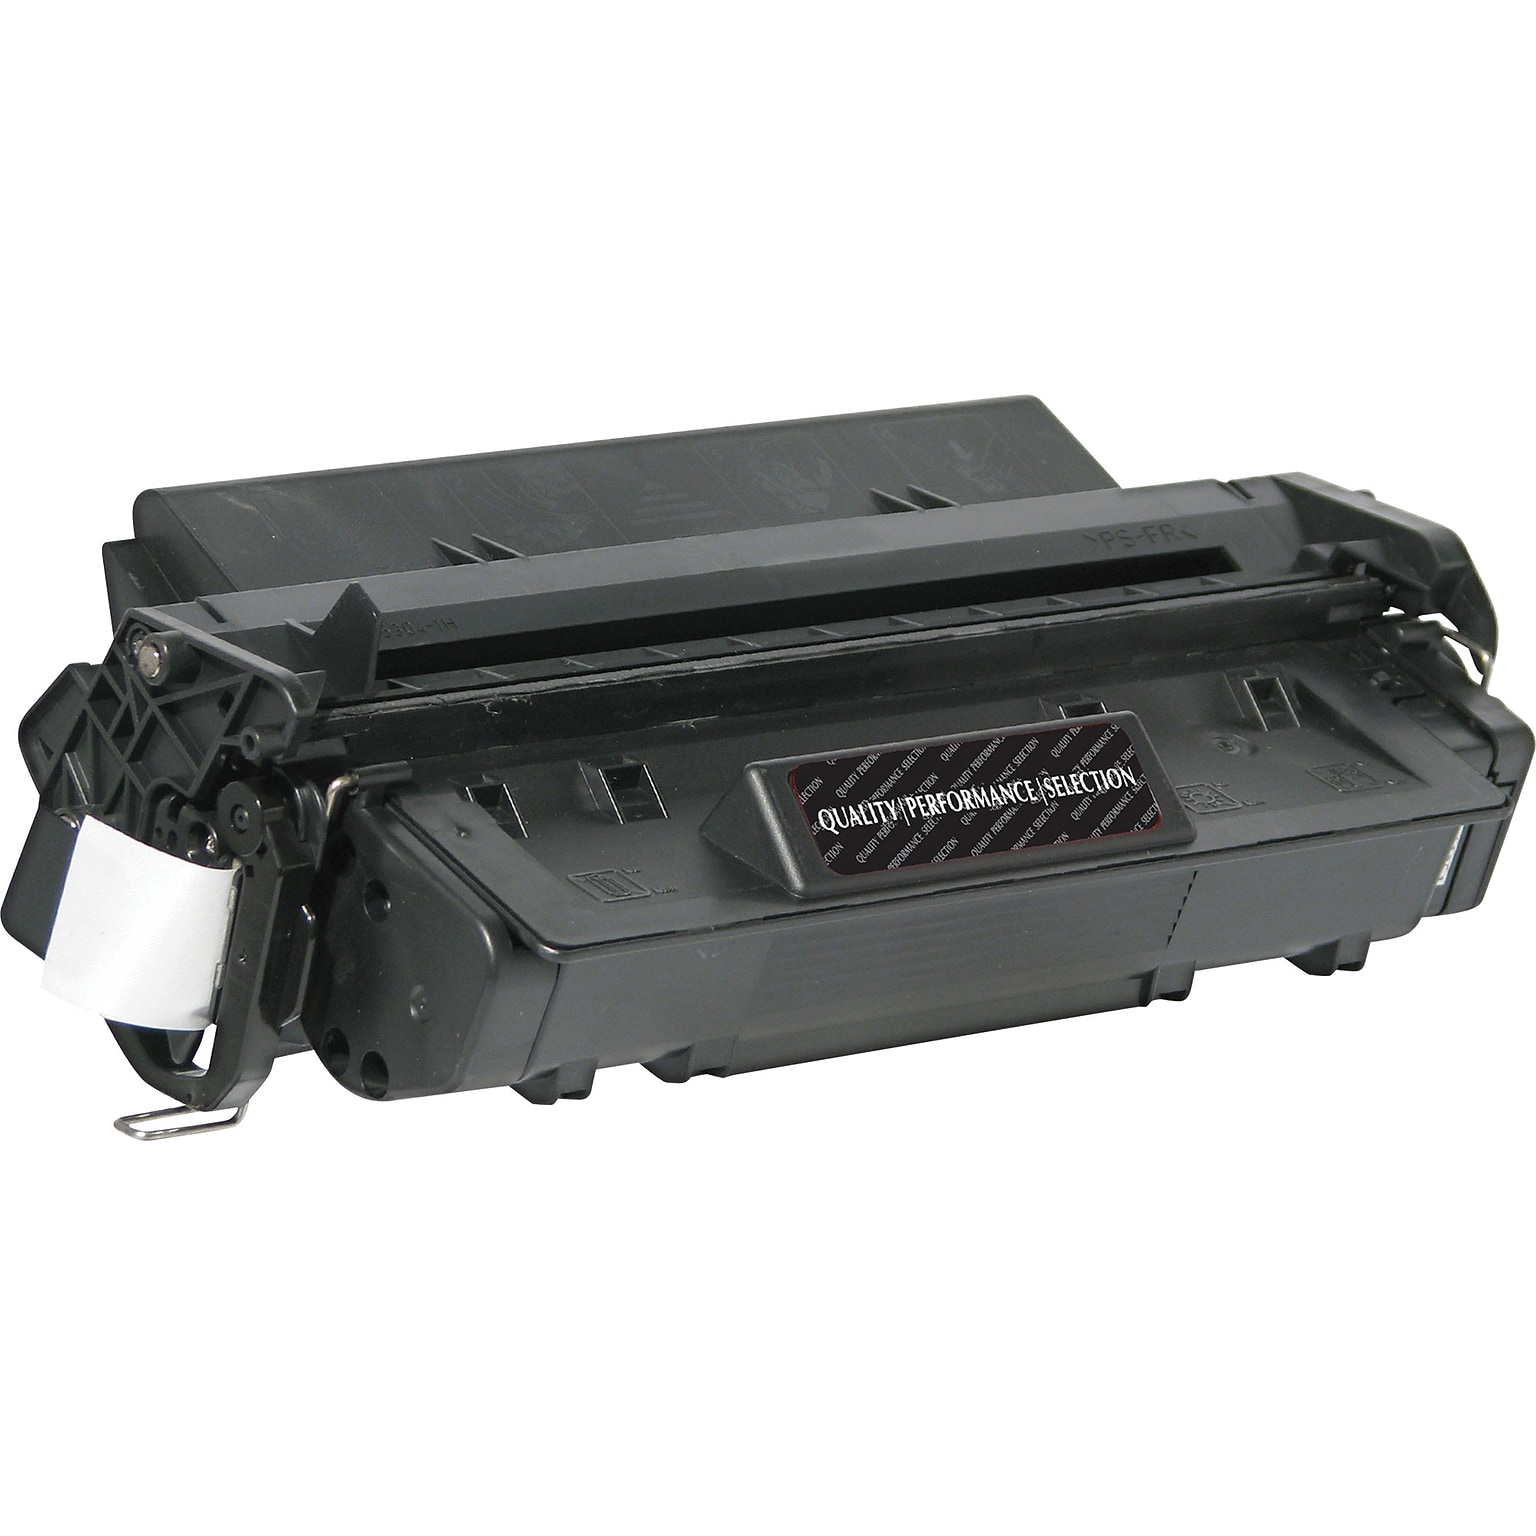 Quill Brand Remanufactured HP 96A (C4096A) Black Standard Yield Laser Toner Cartridge (100% Satisfaction Guaranteed)